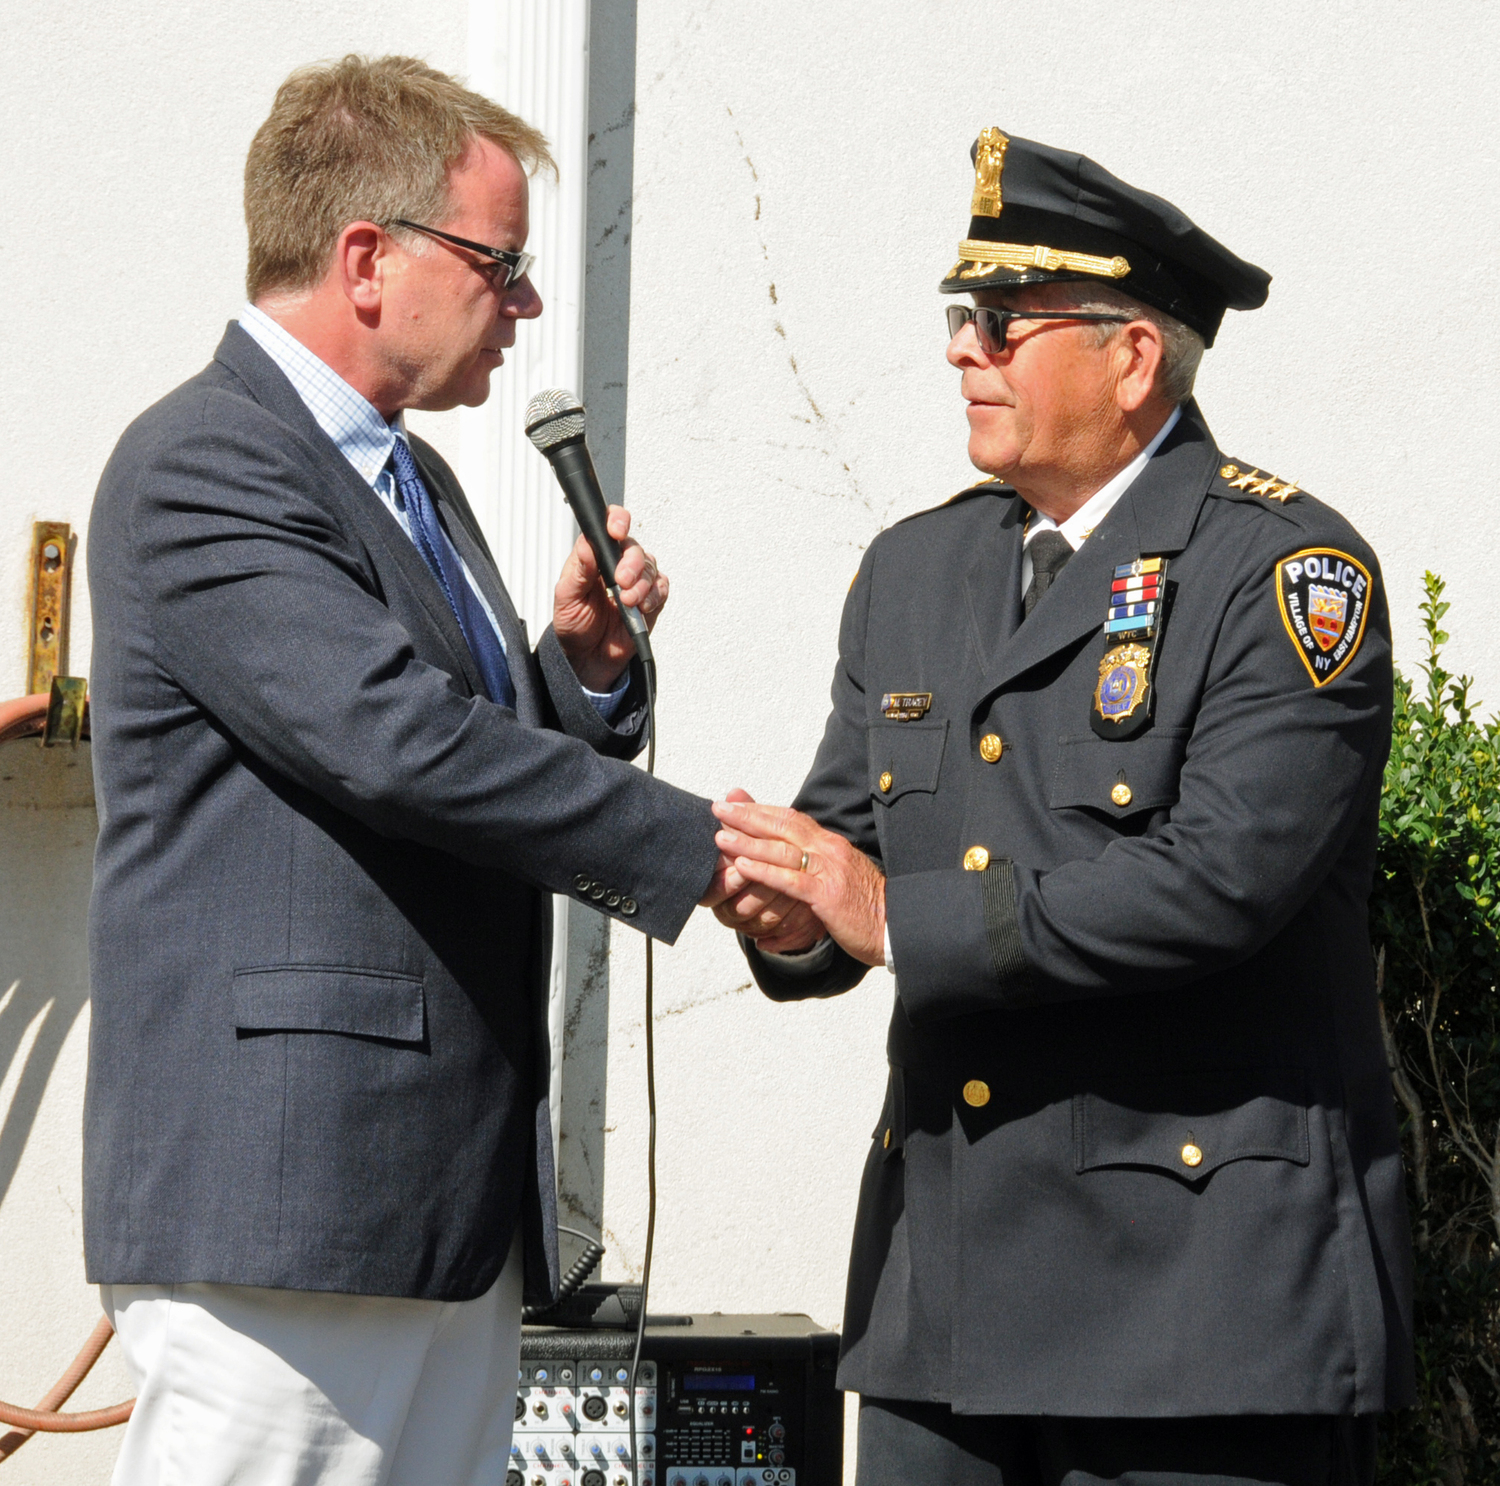 East Hampton Village Police Department Chief Michael Tracey, who stepped down from his post last week after 40 years on the village police force, was honored by Mayor Jerry Larsen and other police officers at a 